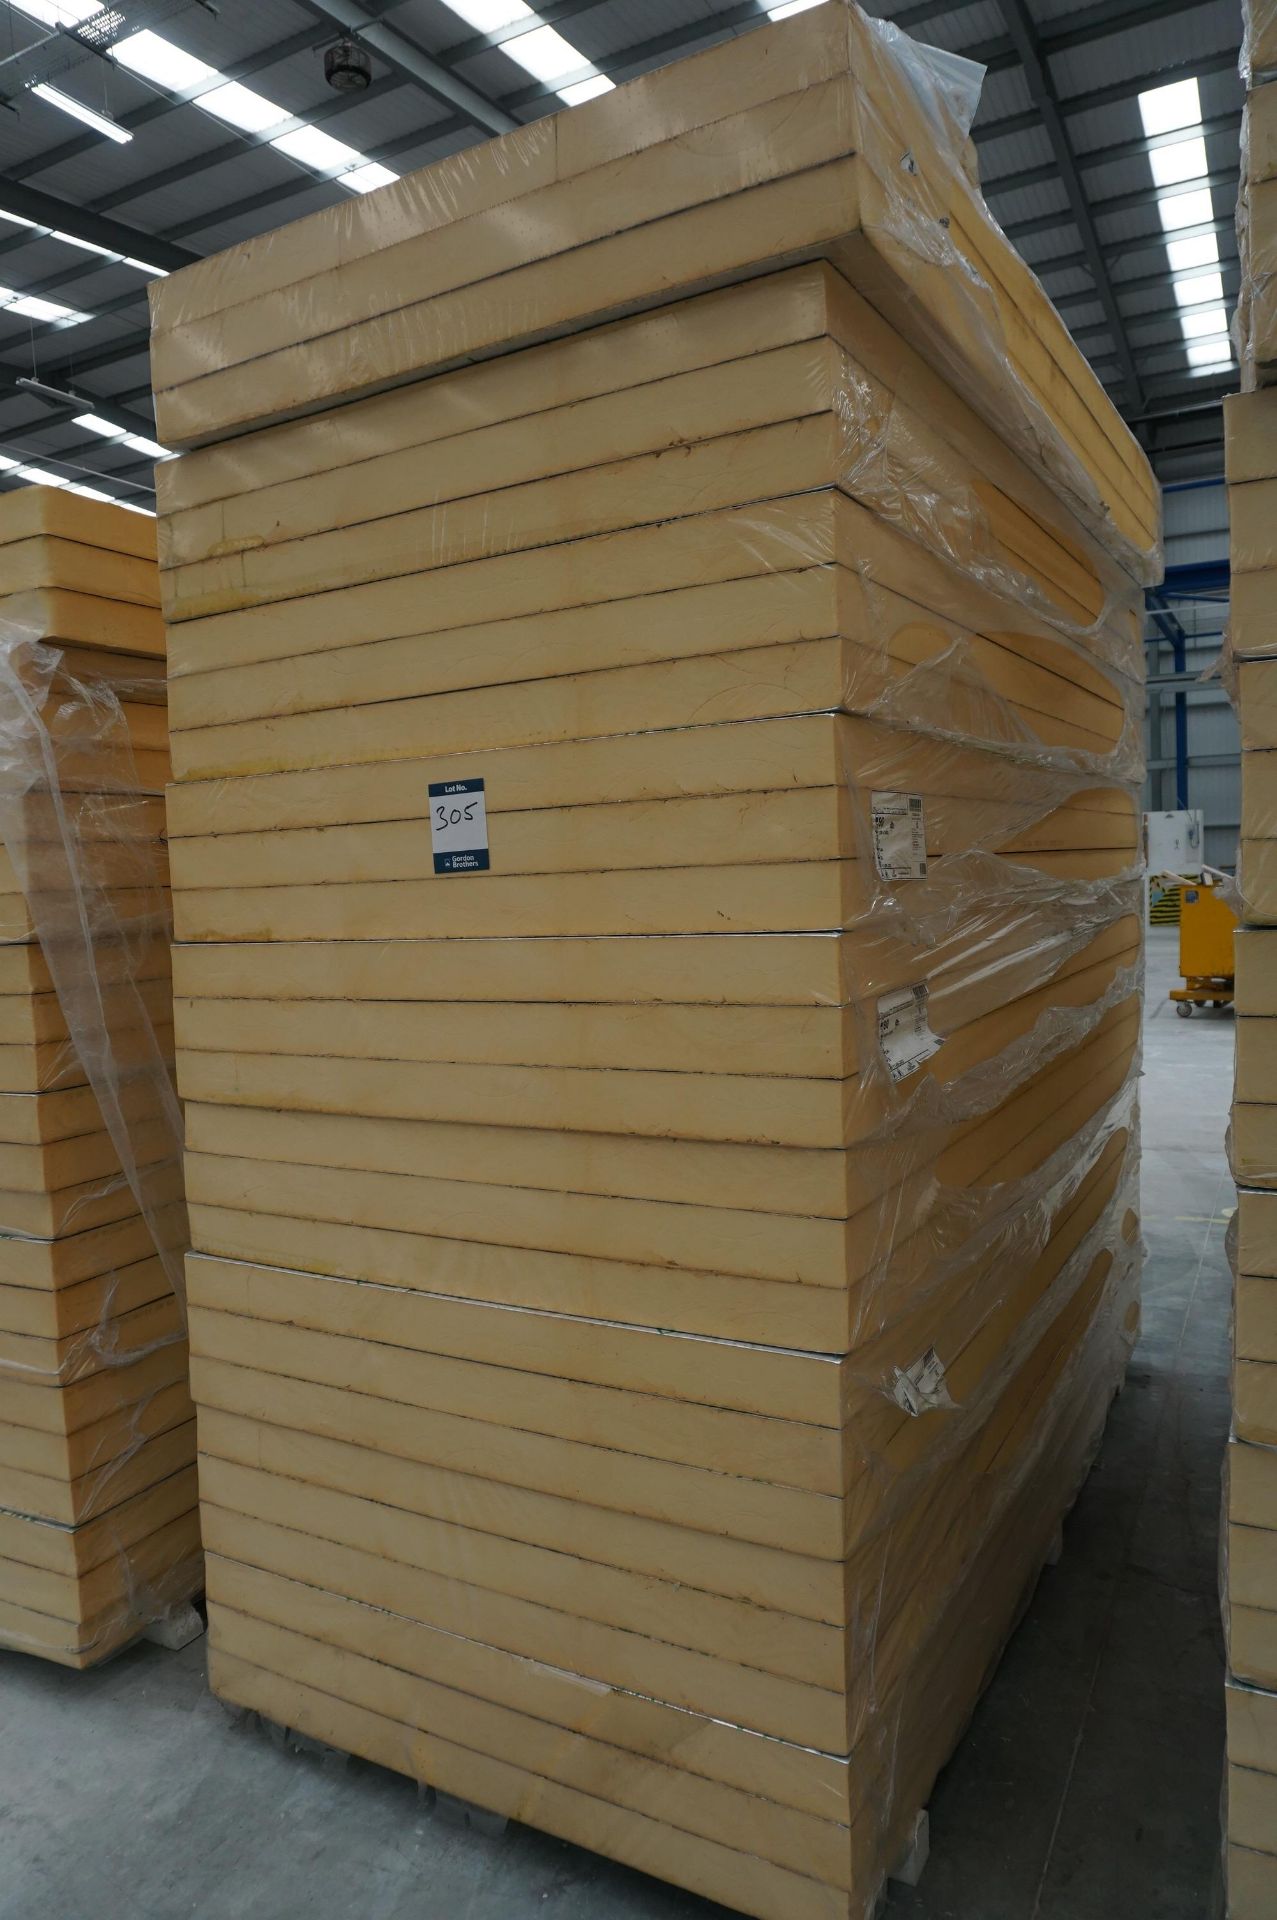 27x (no.) Kingspan, Therma TP10 insulation boards, 1200 x 2400 x 90mm - Image 2 of 4